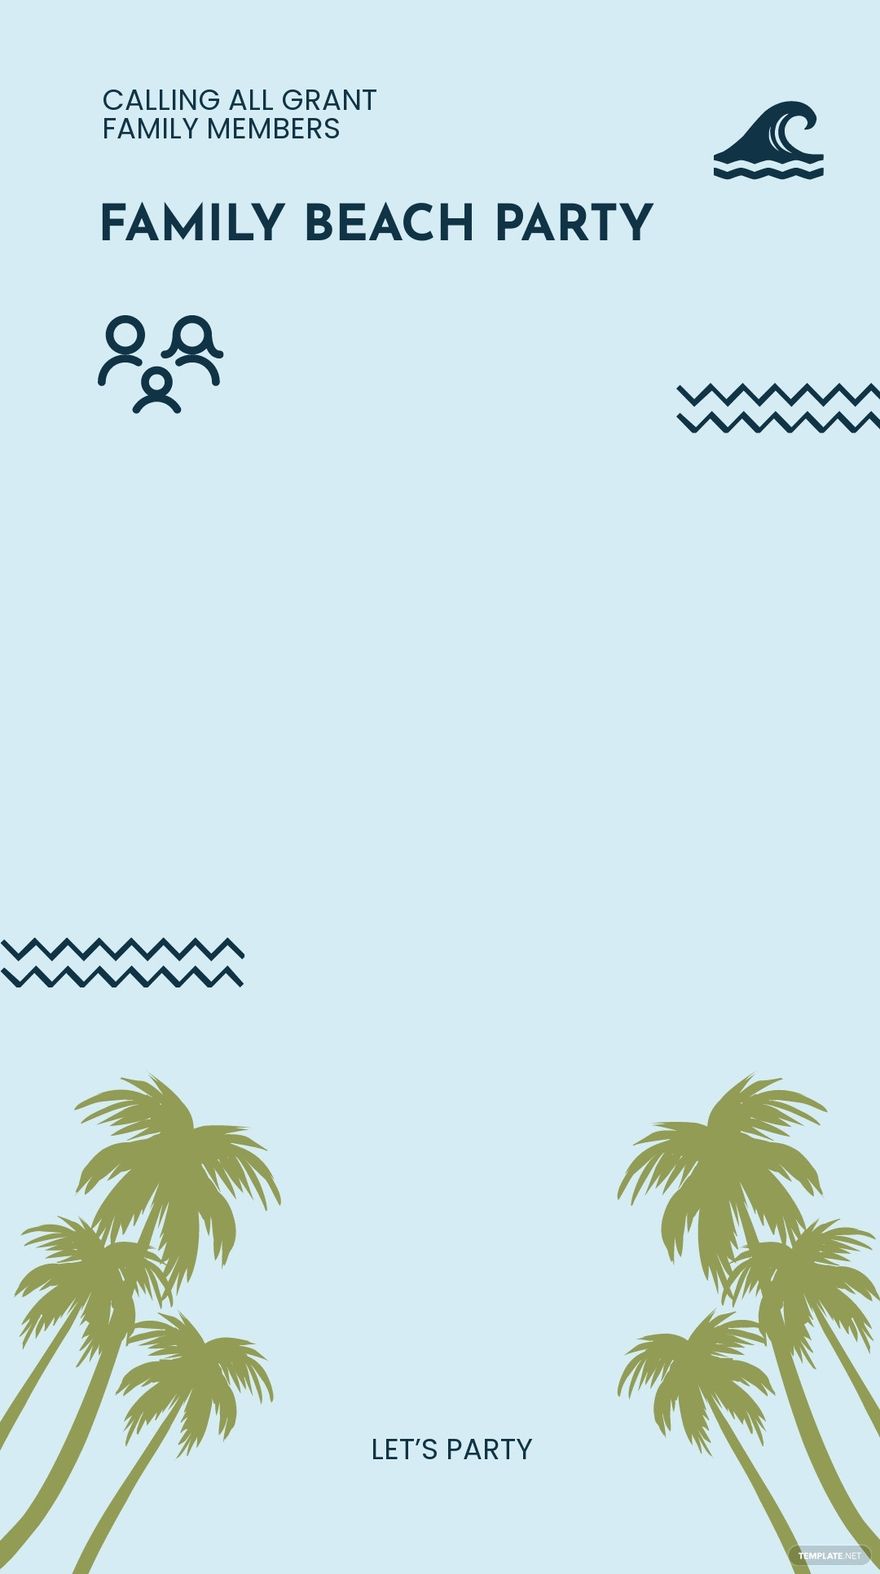 Family Beach Party Snapchat Geofilter